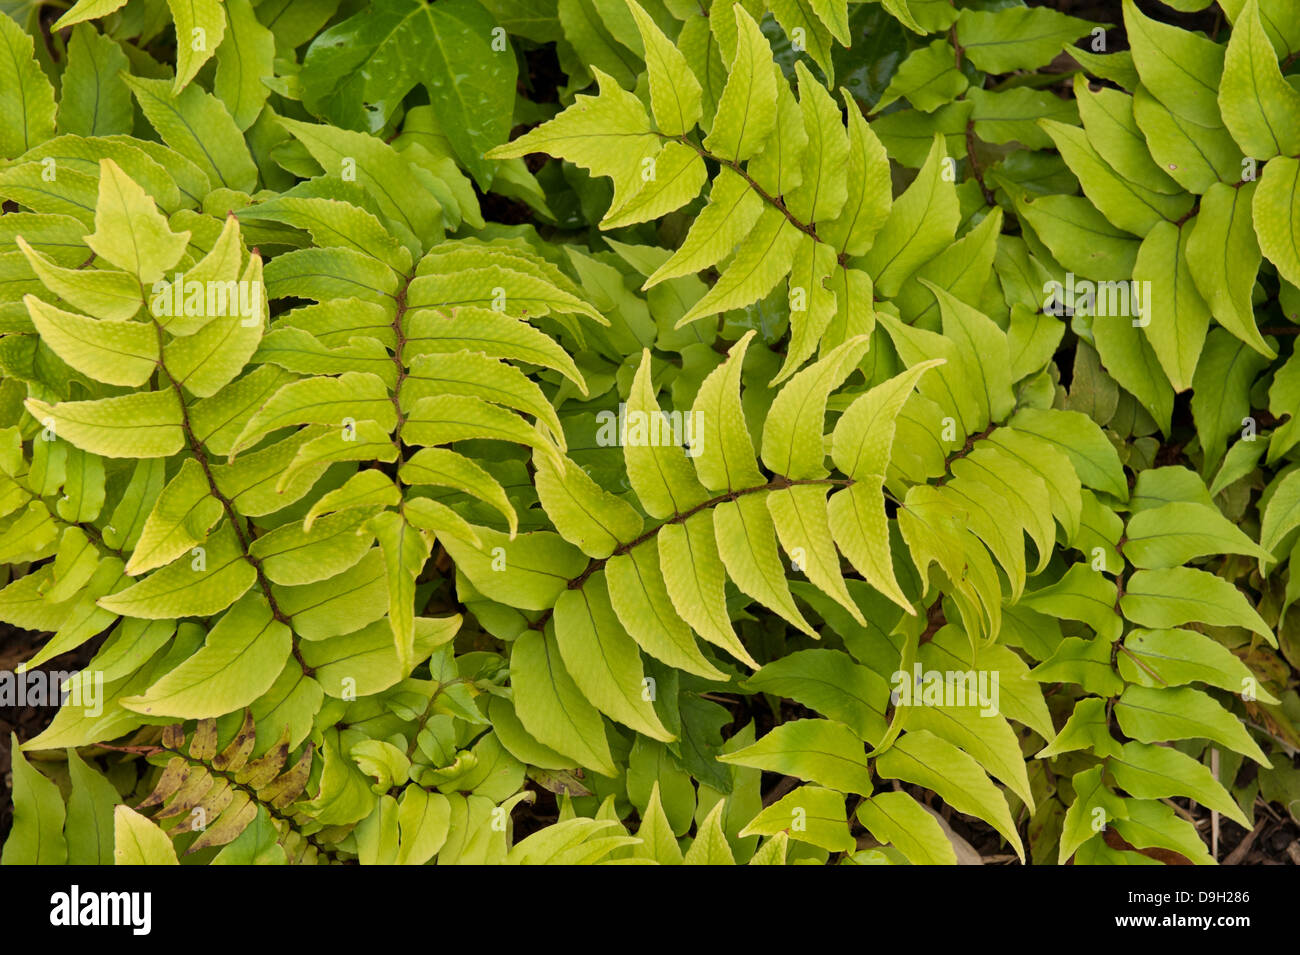 Fortune's cyrtomium or cyrtomium fortunei, also known as Holly Fern plant detail Stock Photo